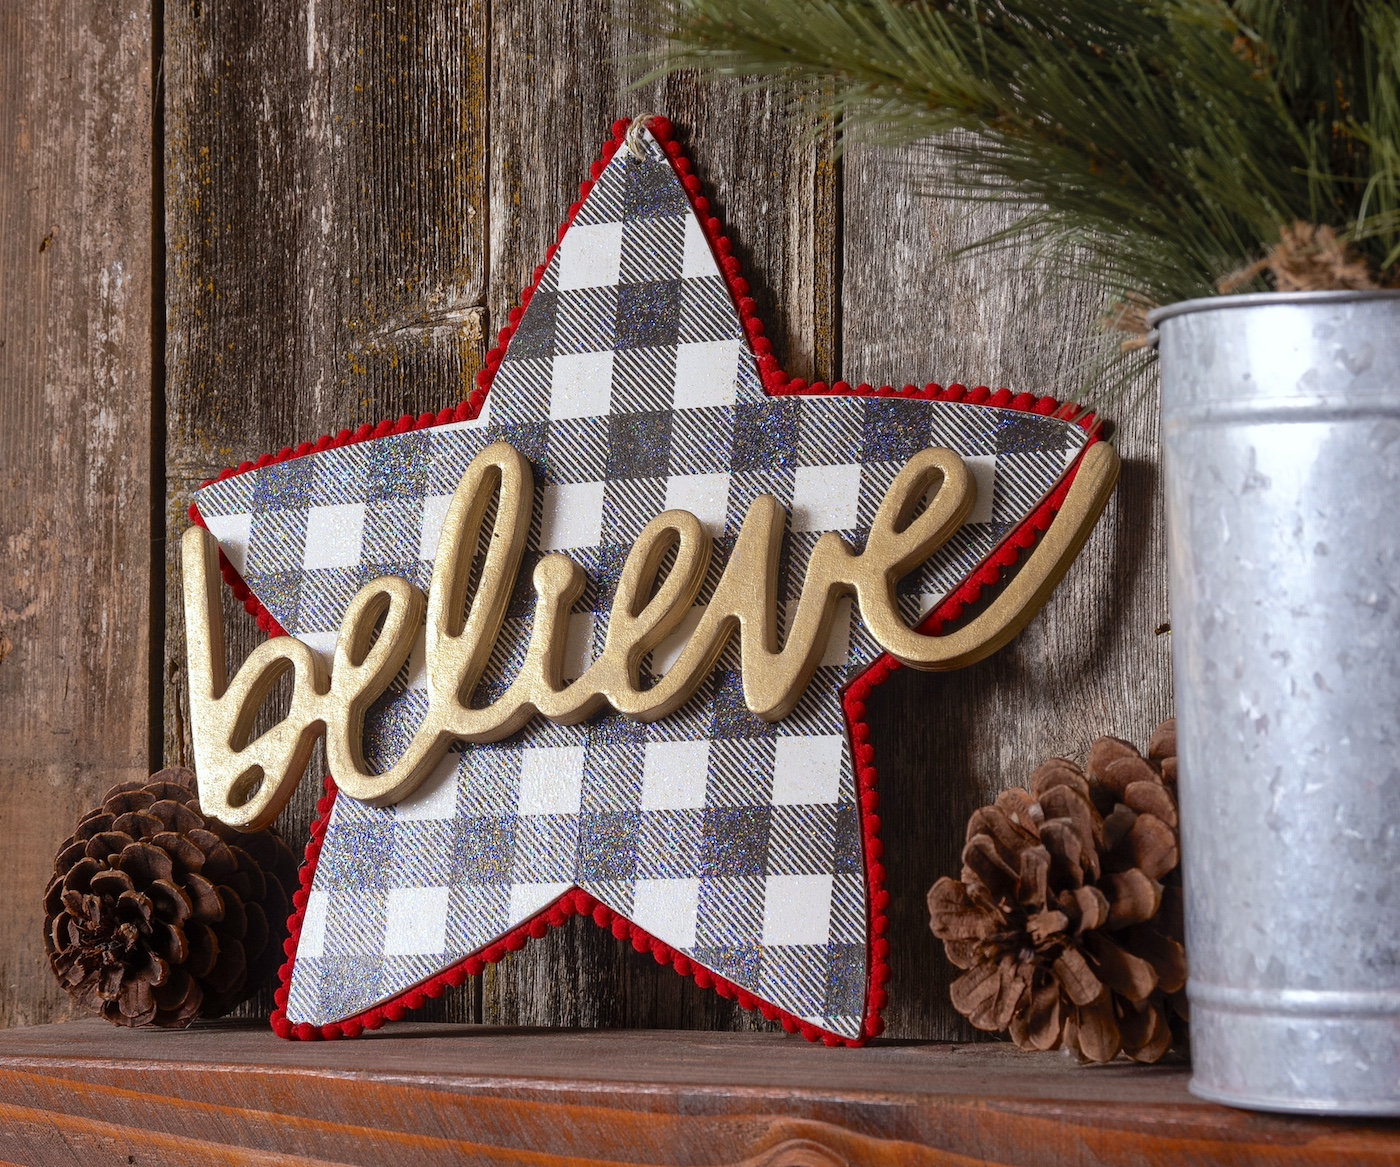 Decorate a Dollar Tree Wood Star for Christmas